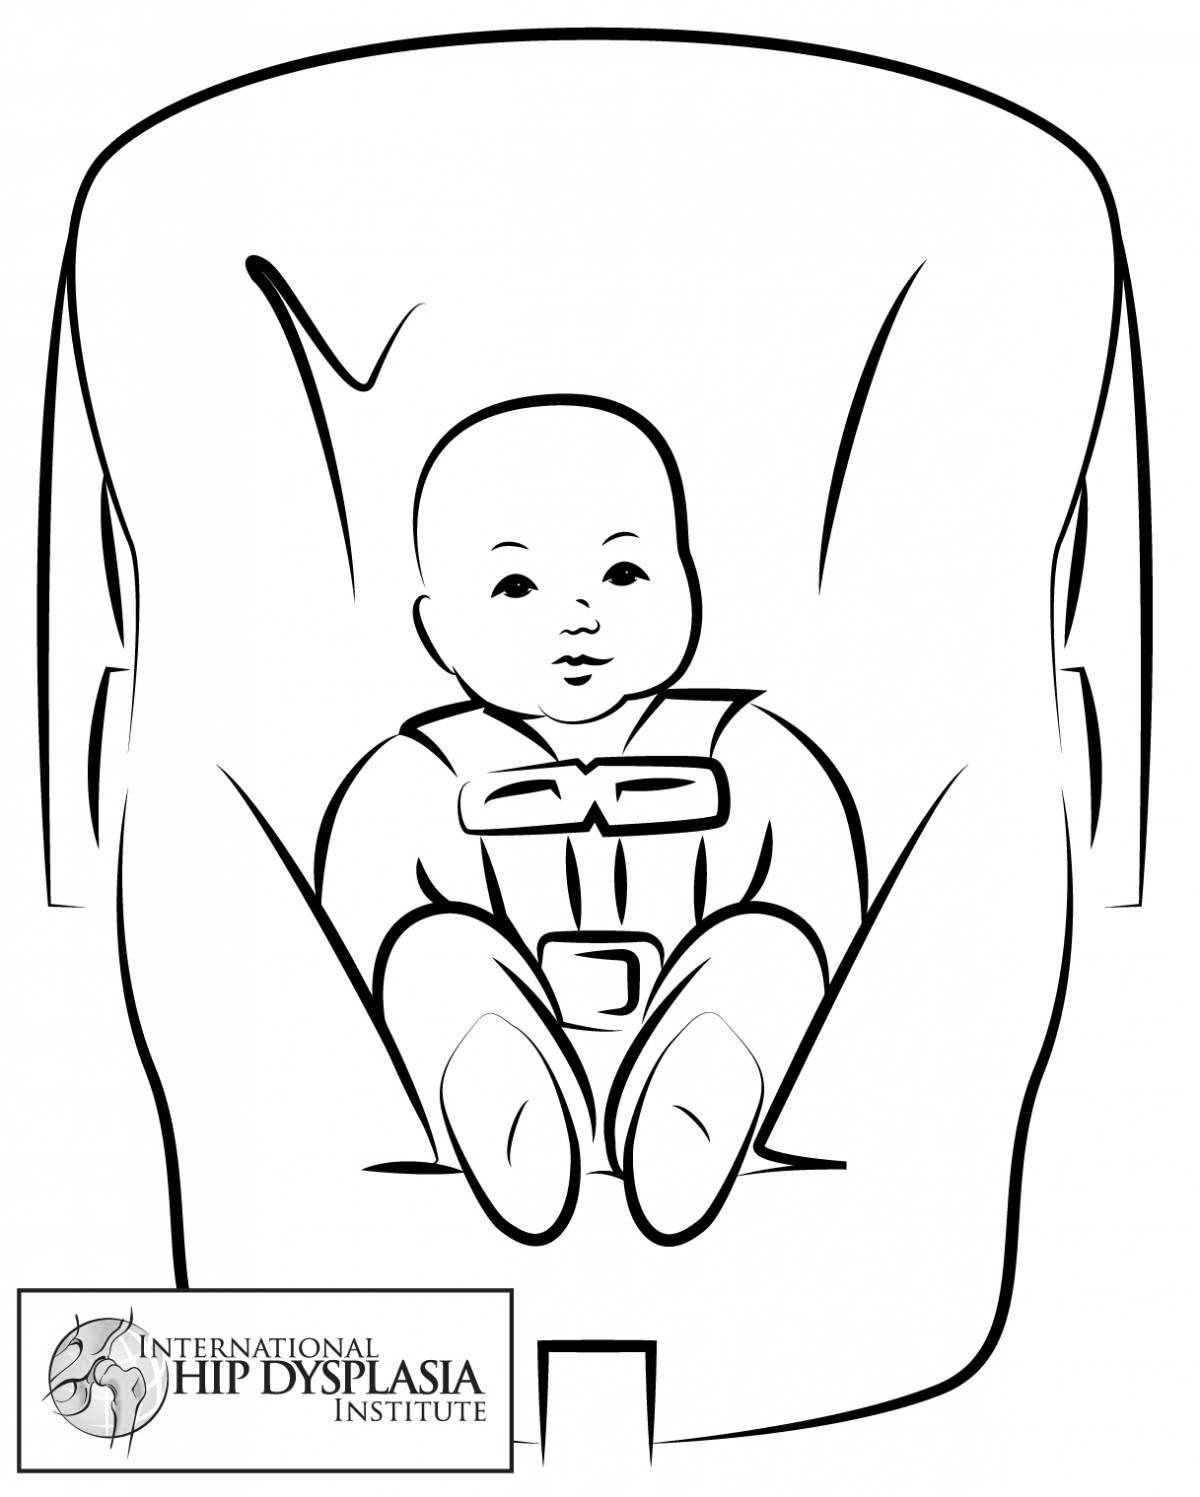 Radiant baby in a car seat